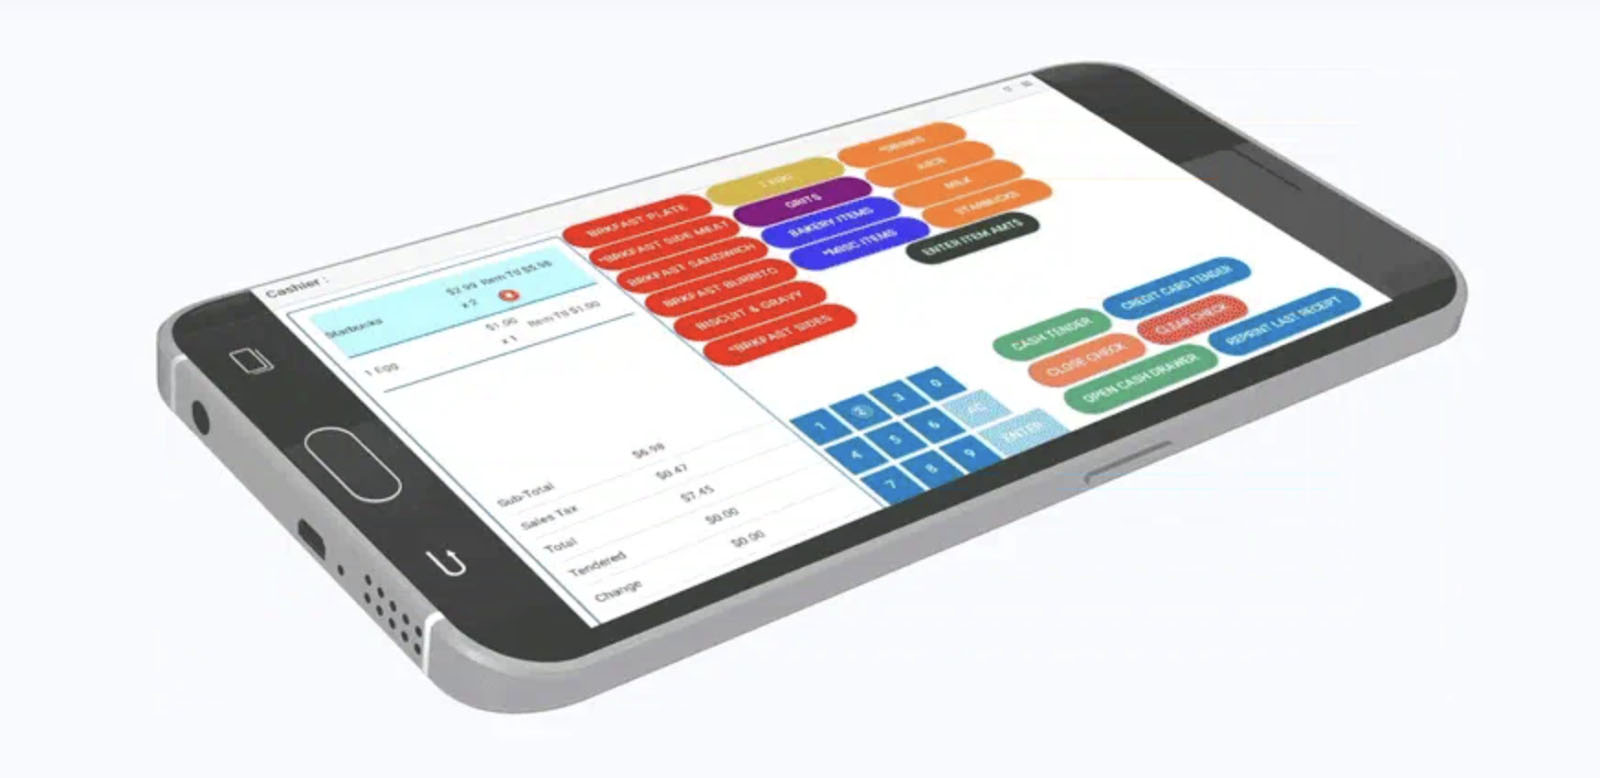 Image showing Food Service Ace's POS App used in a smartphone.